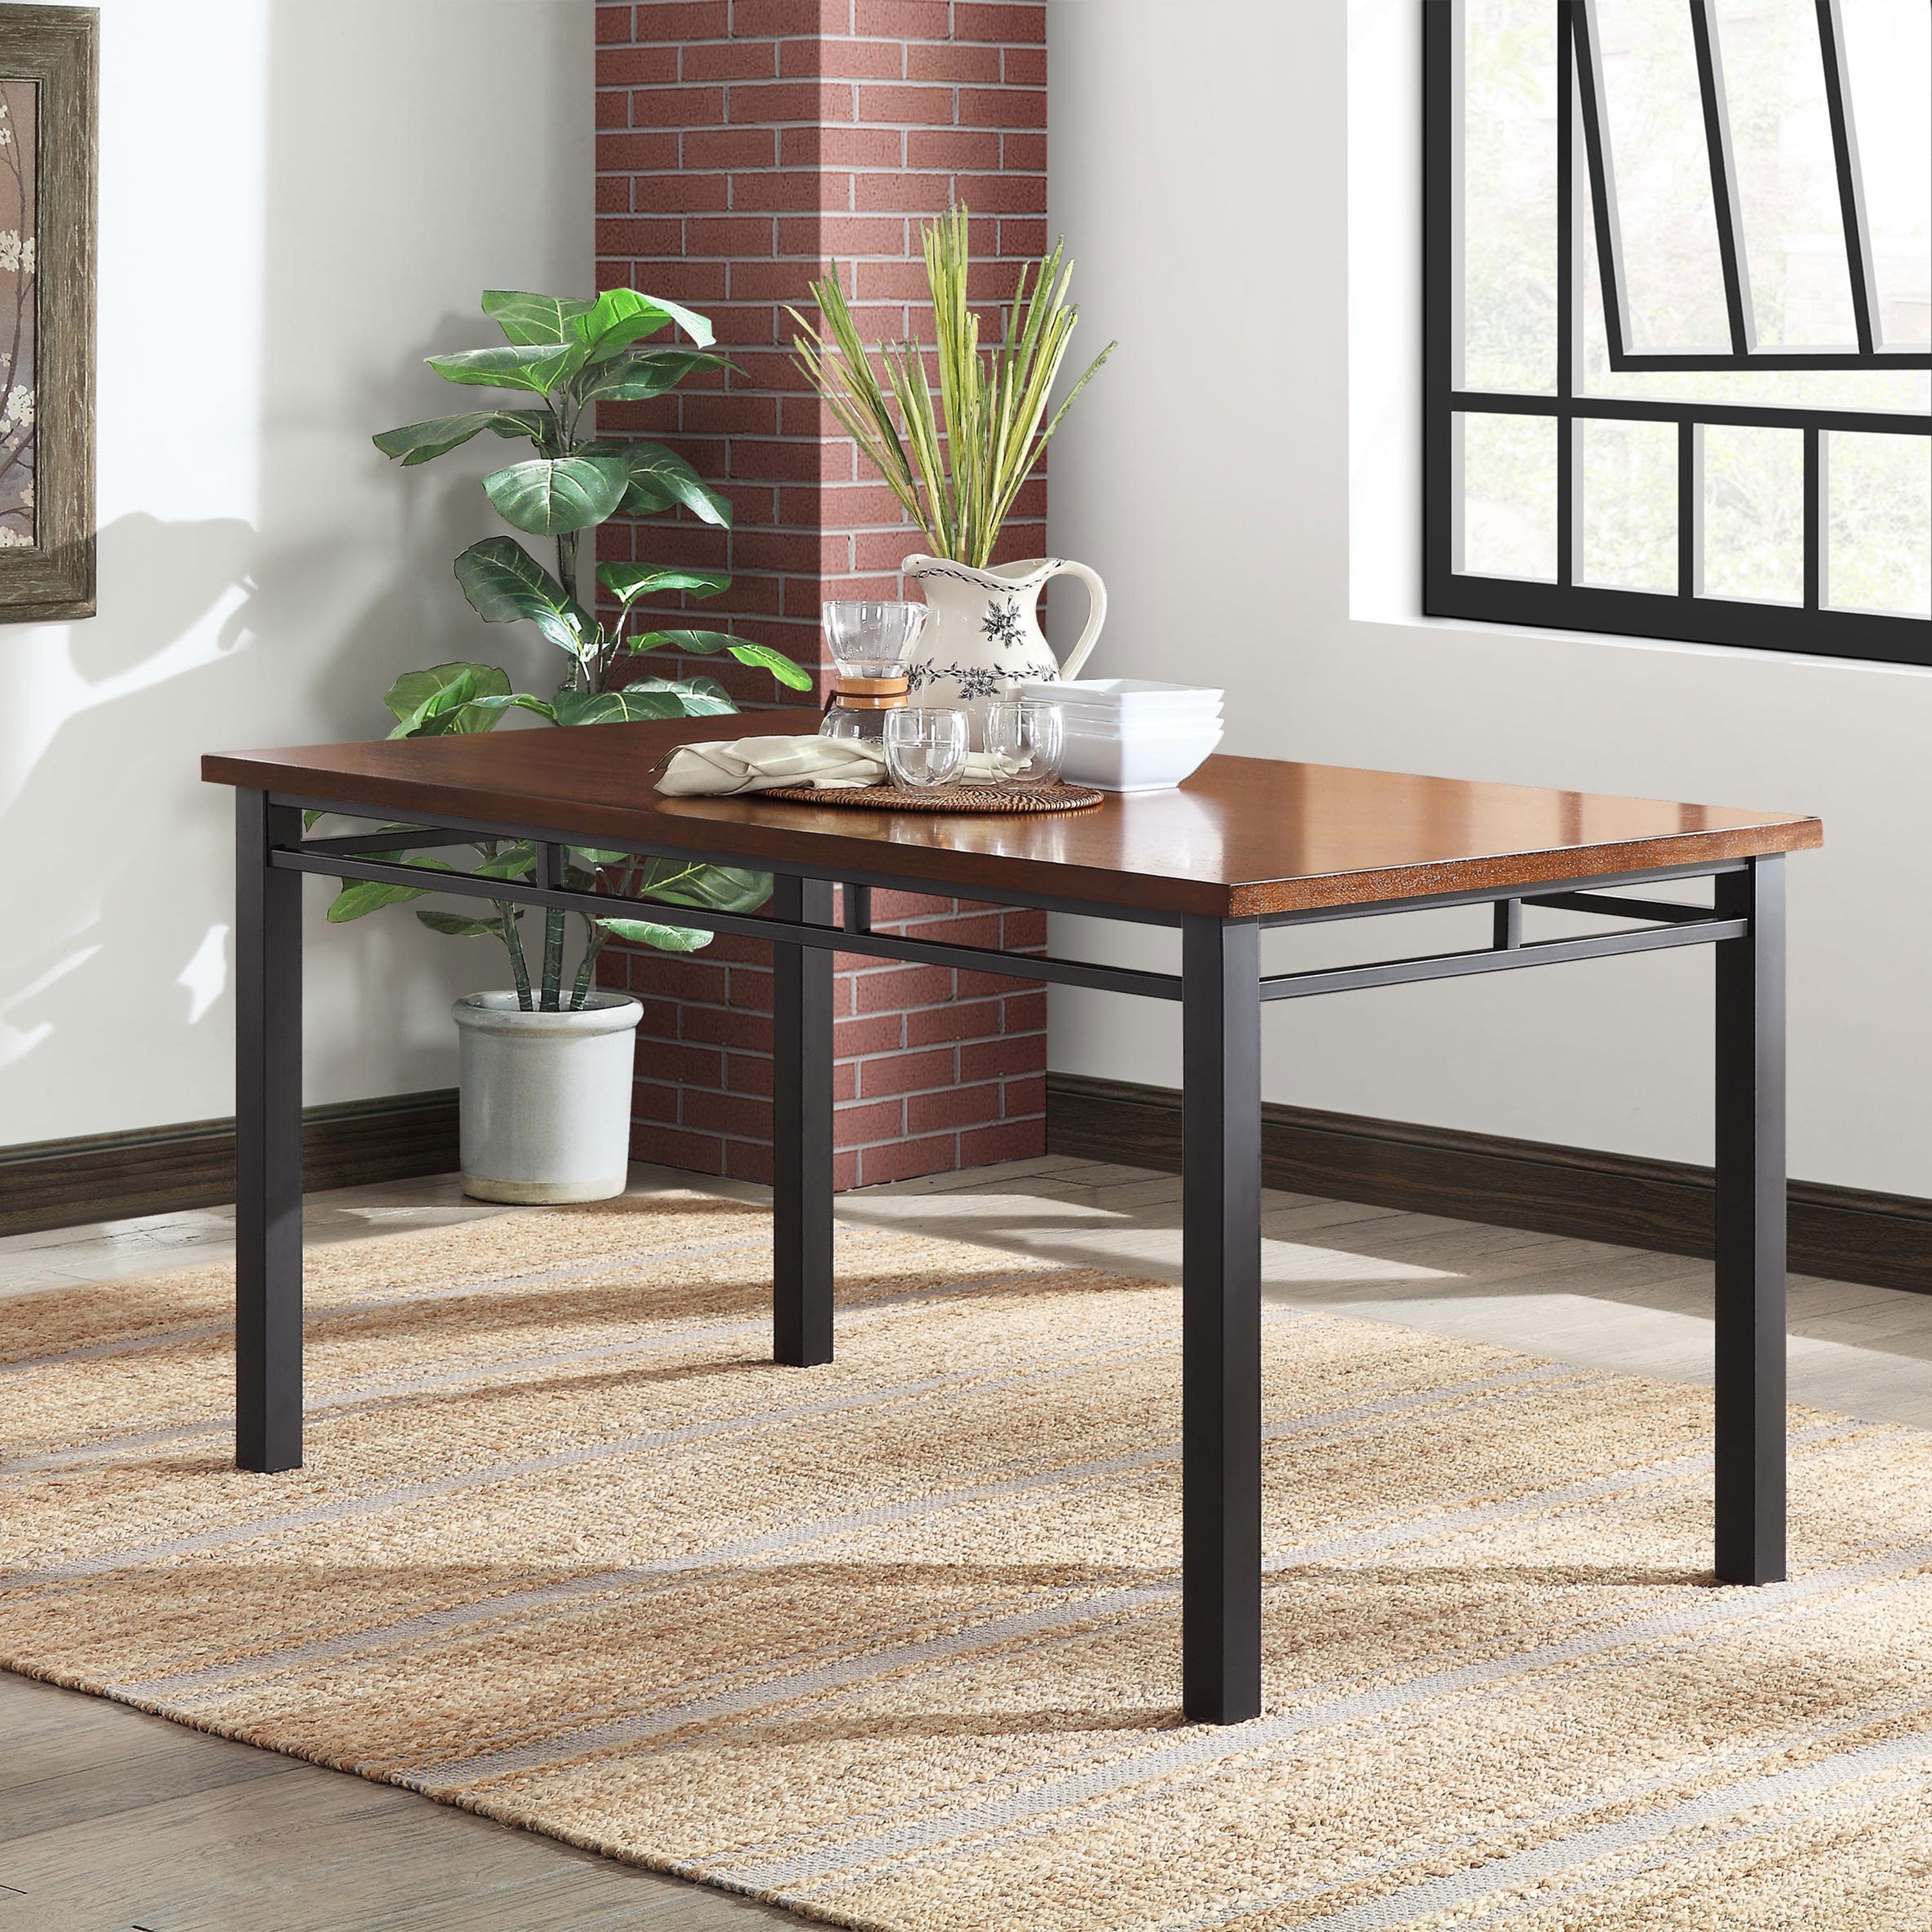 Better Homes and Gardens Maddox Crossing Dining Table Brown BH44-084-299-01 for sale online 